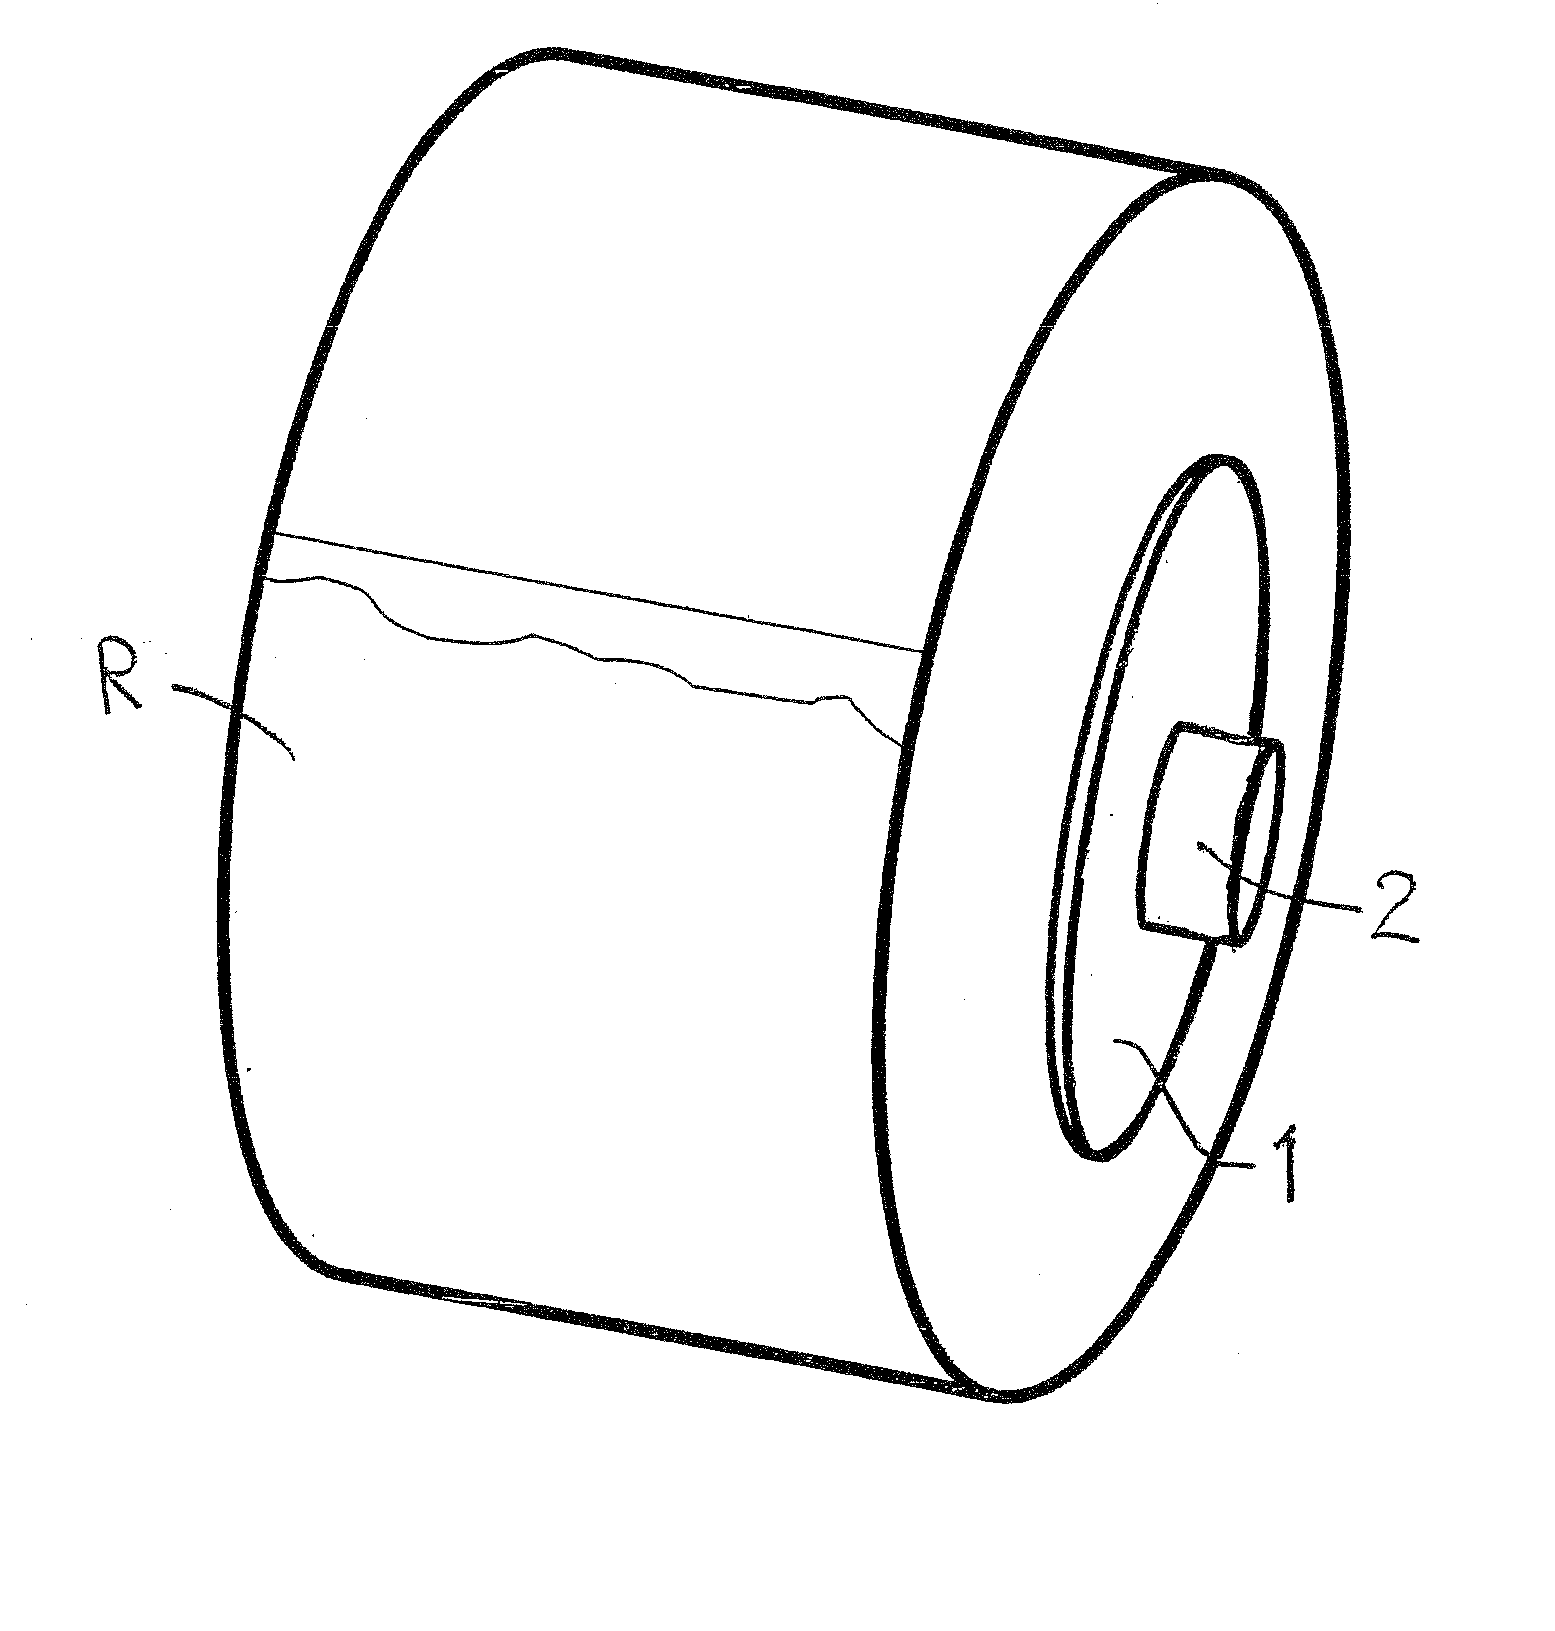 Adapter for a solid or coreless roll of hygiene paper